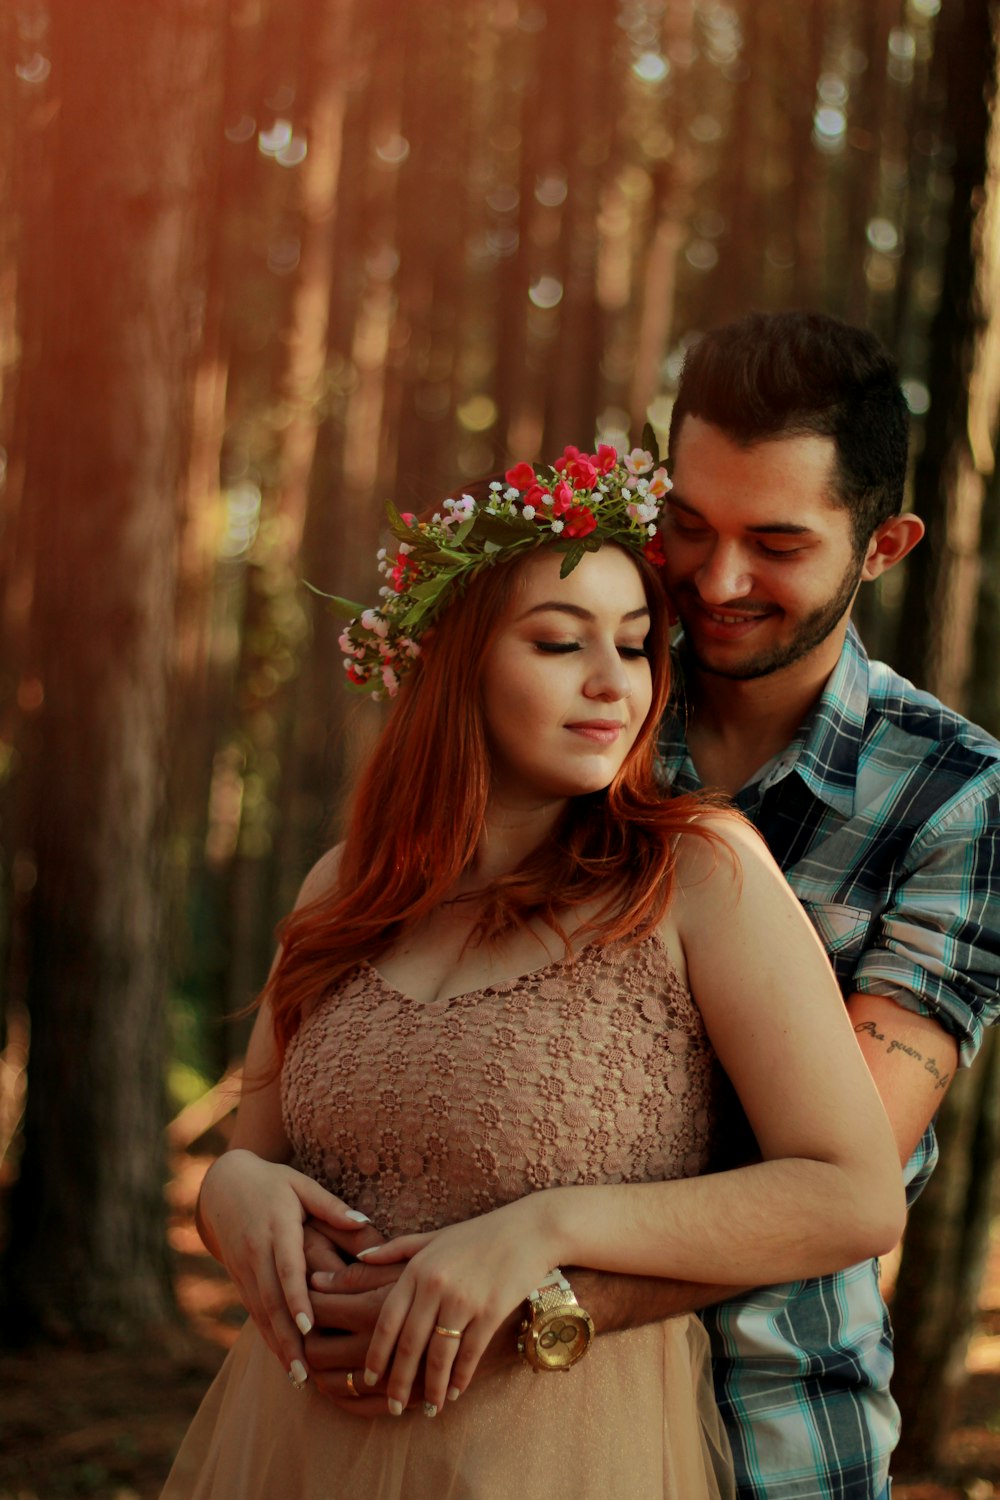 man hugging woman with flower crown